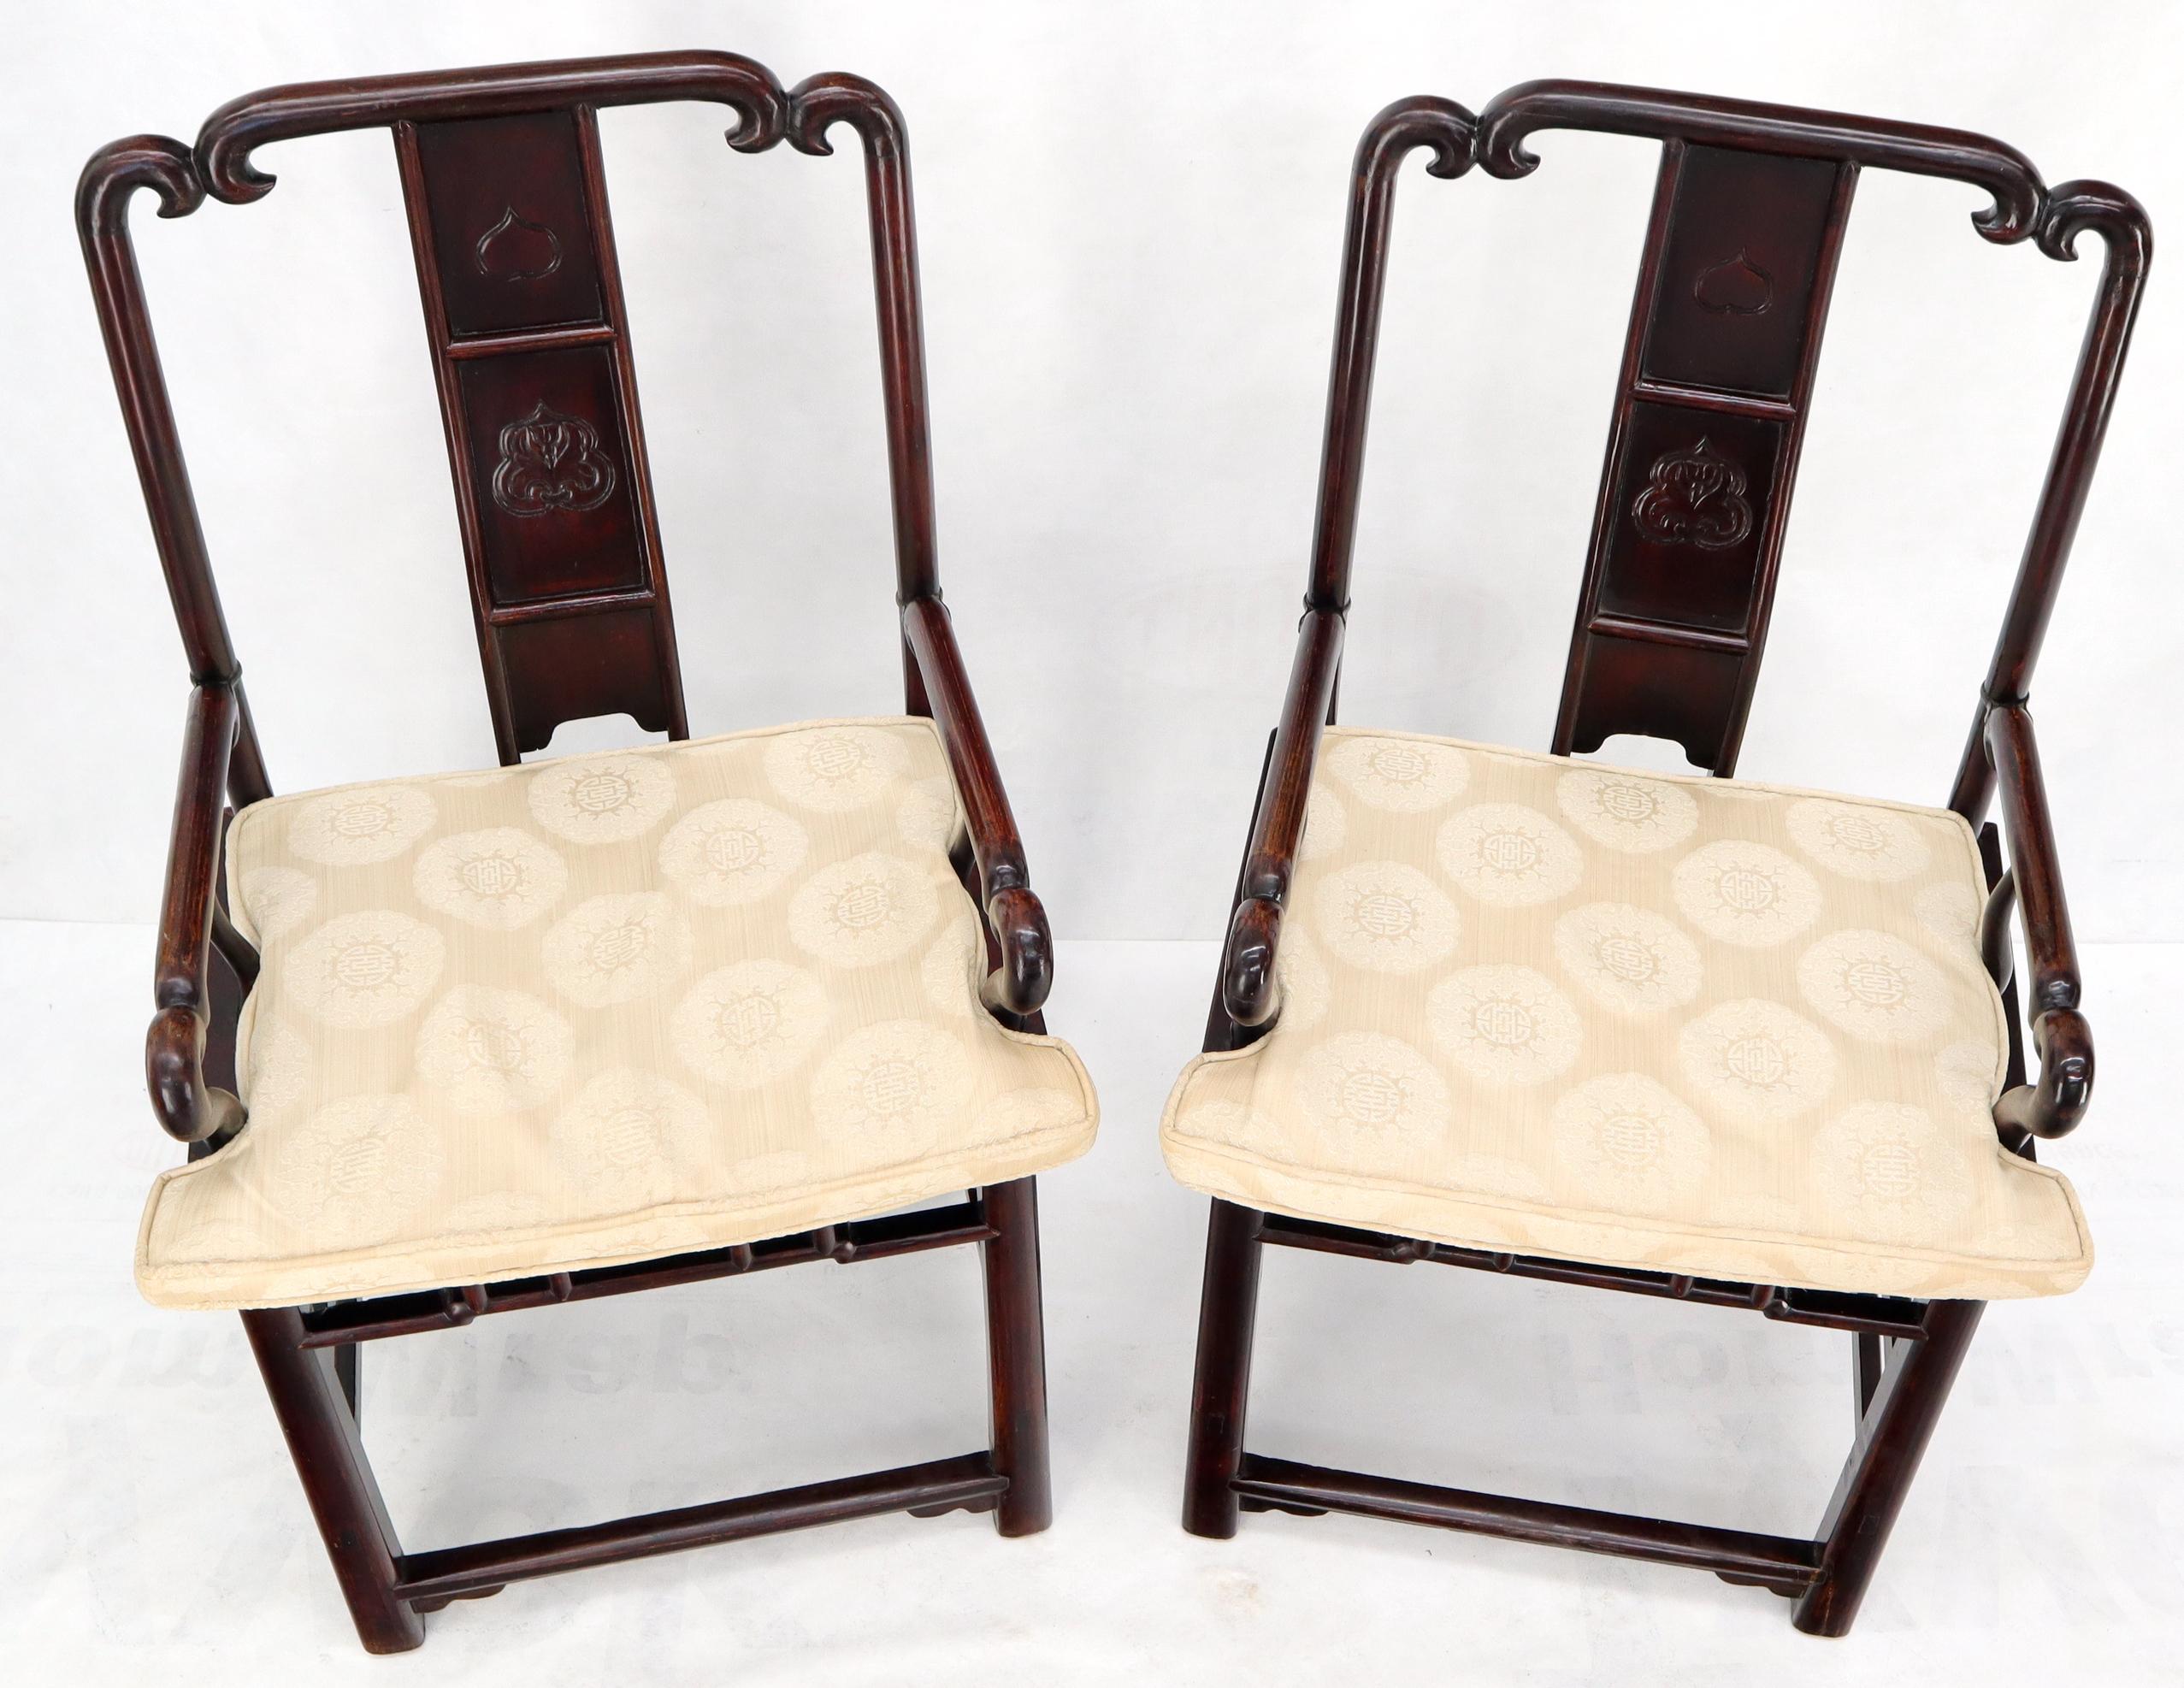 Pair of Chinese Rosewood Nicely Carved Arm Side Chairs In Good Condition For Sale In Rockaway, NJ